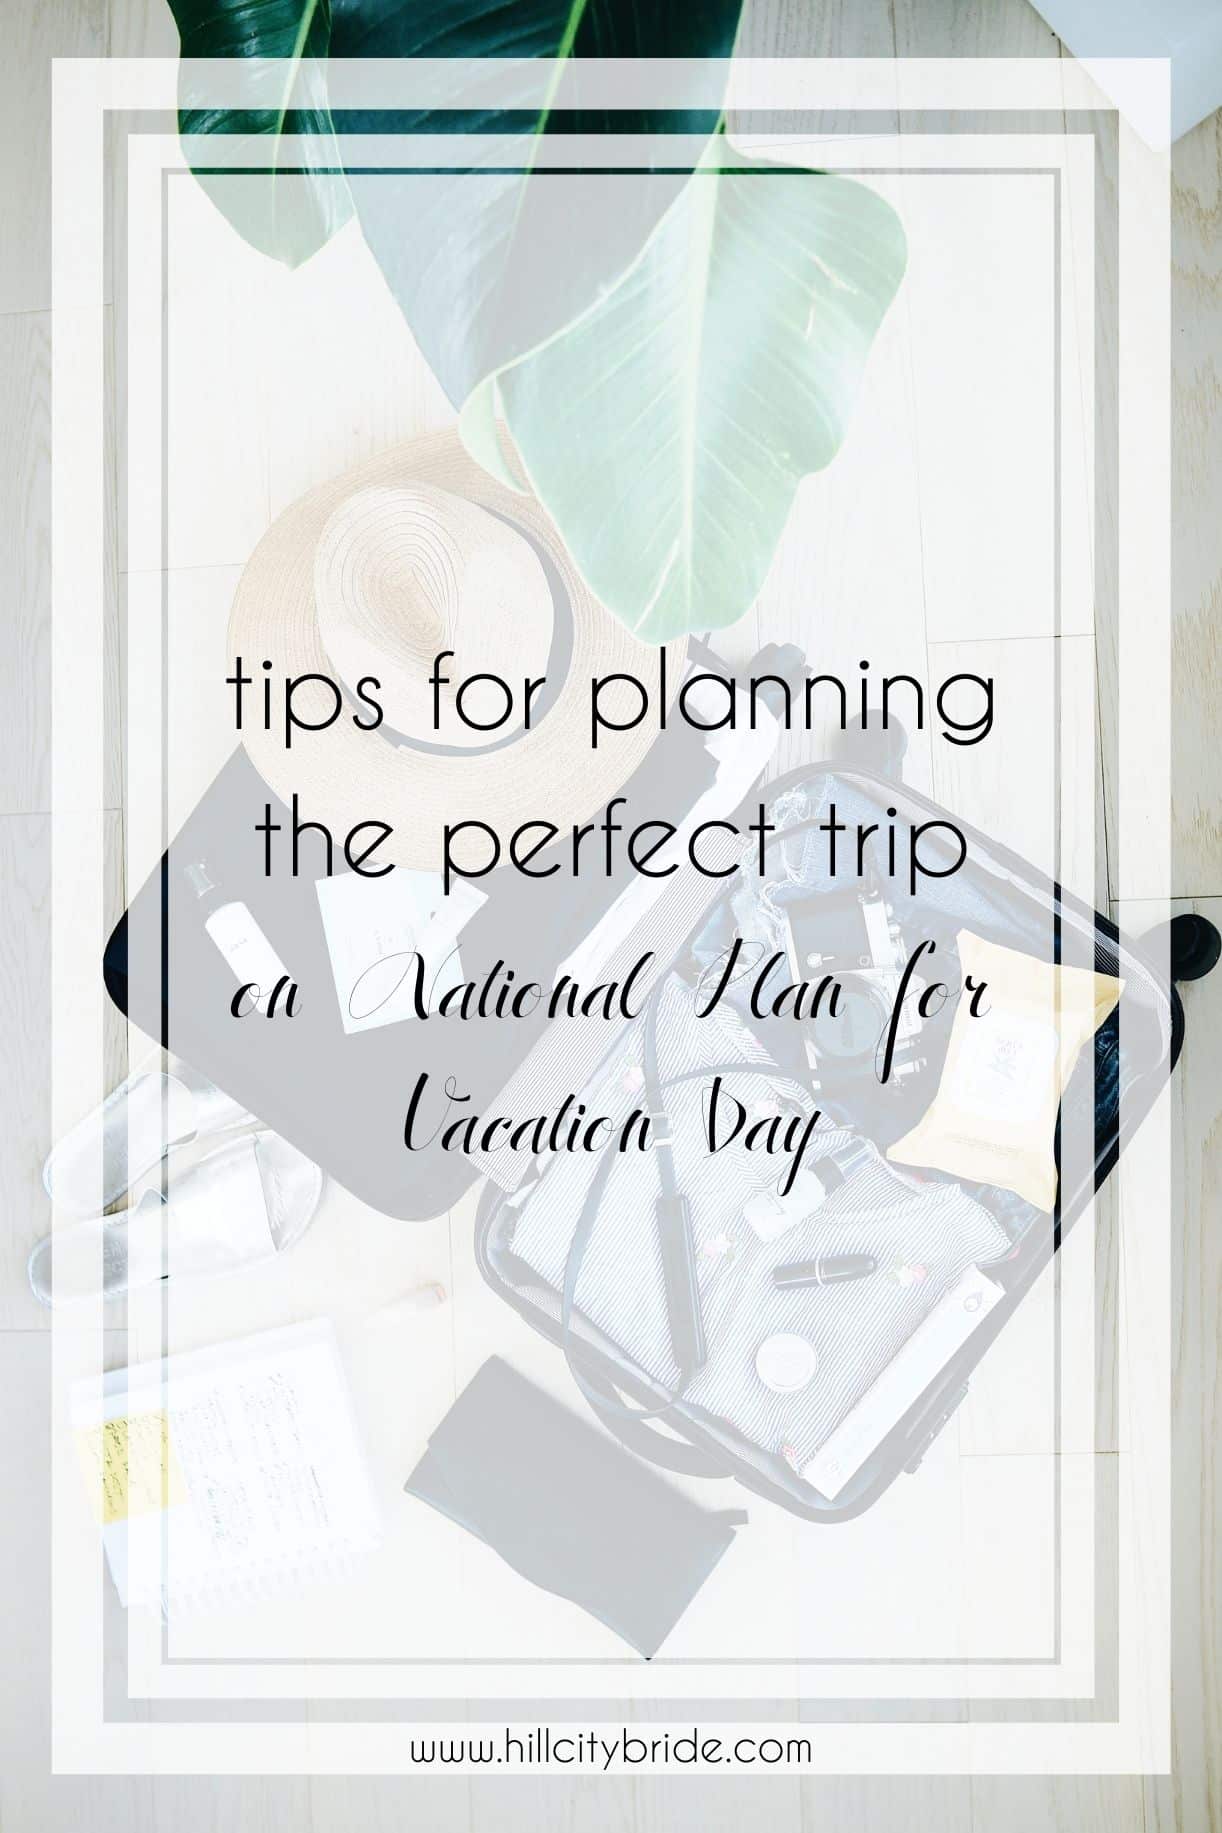 How to Be Prepared for an Amazing National Plan for Vacation Day